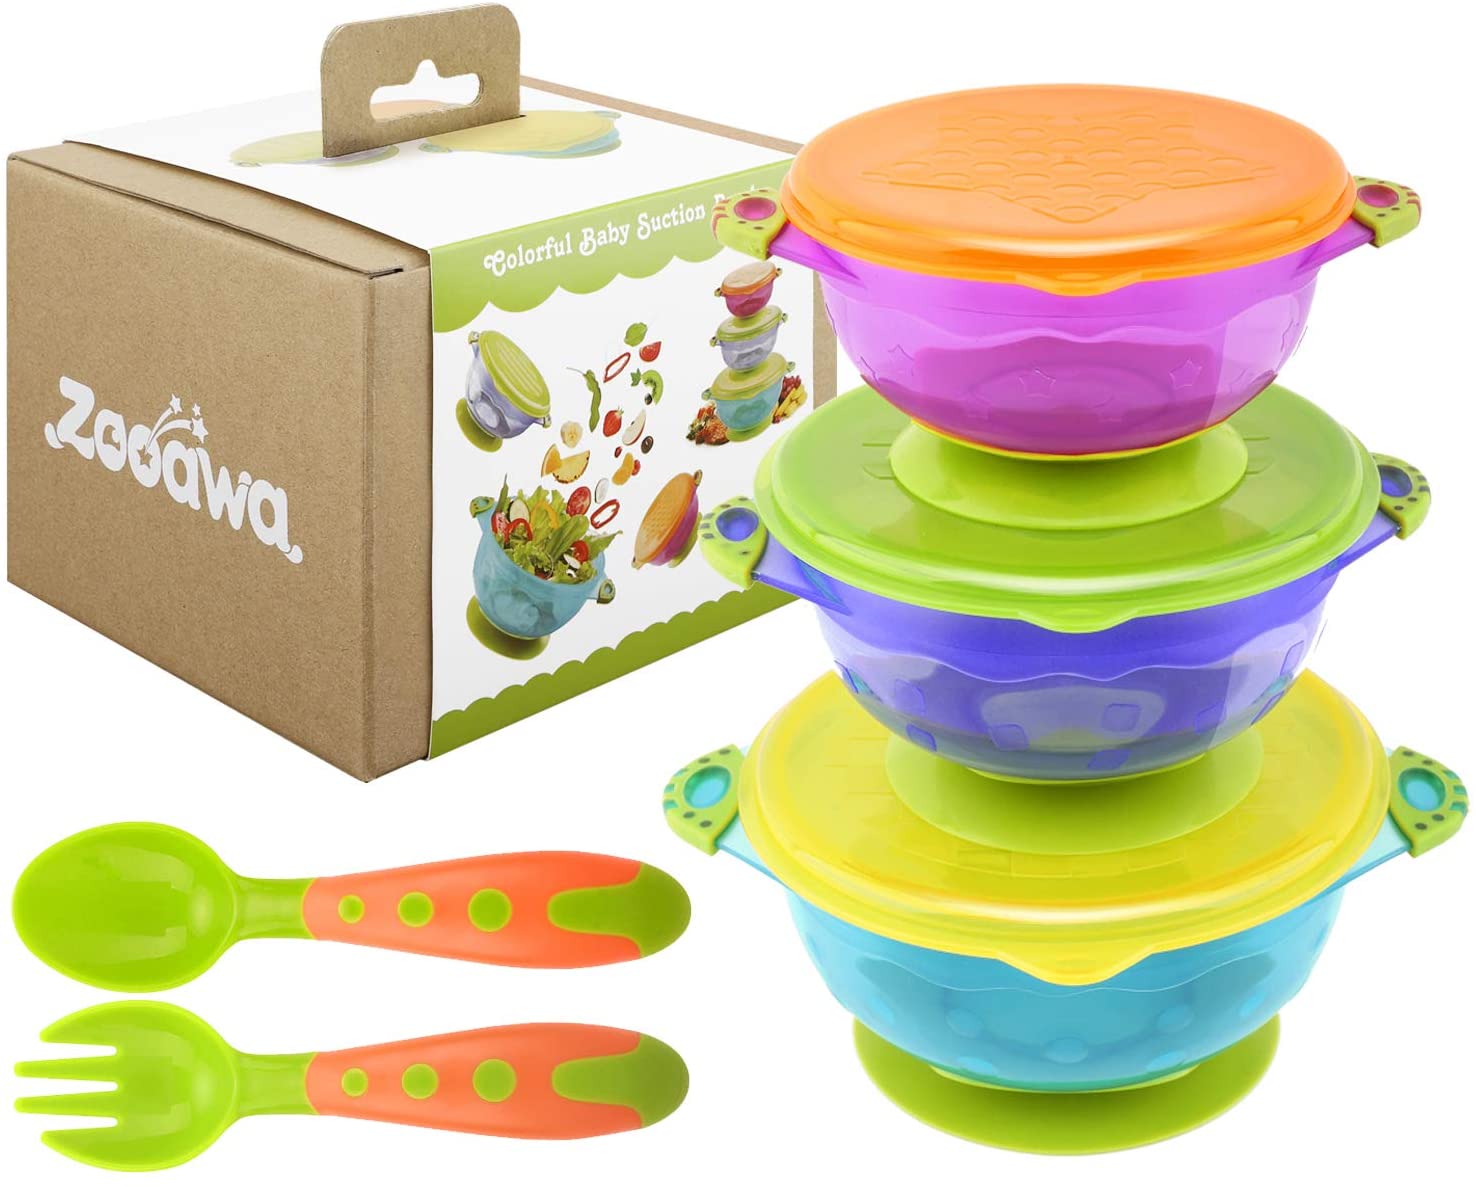 Zooawa Baby Suction Bowls + Fork Spoon Set, 3 Pack Nonslip Spill Proof BPA-Free Feeding Bowls with Lids.